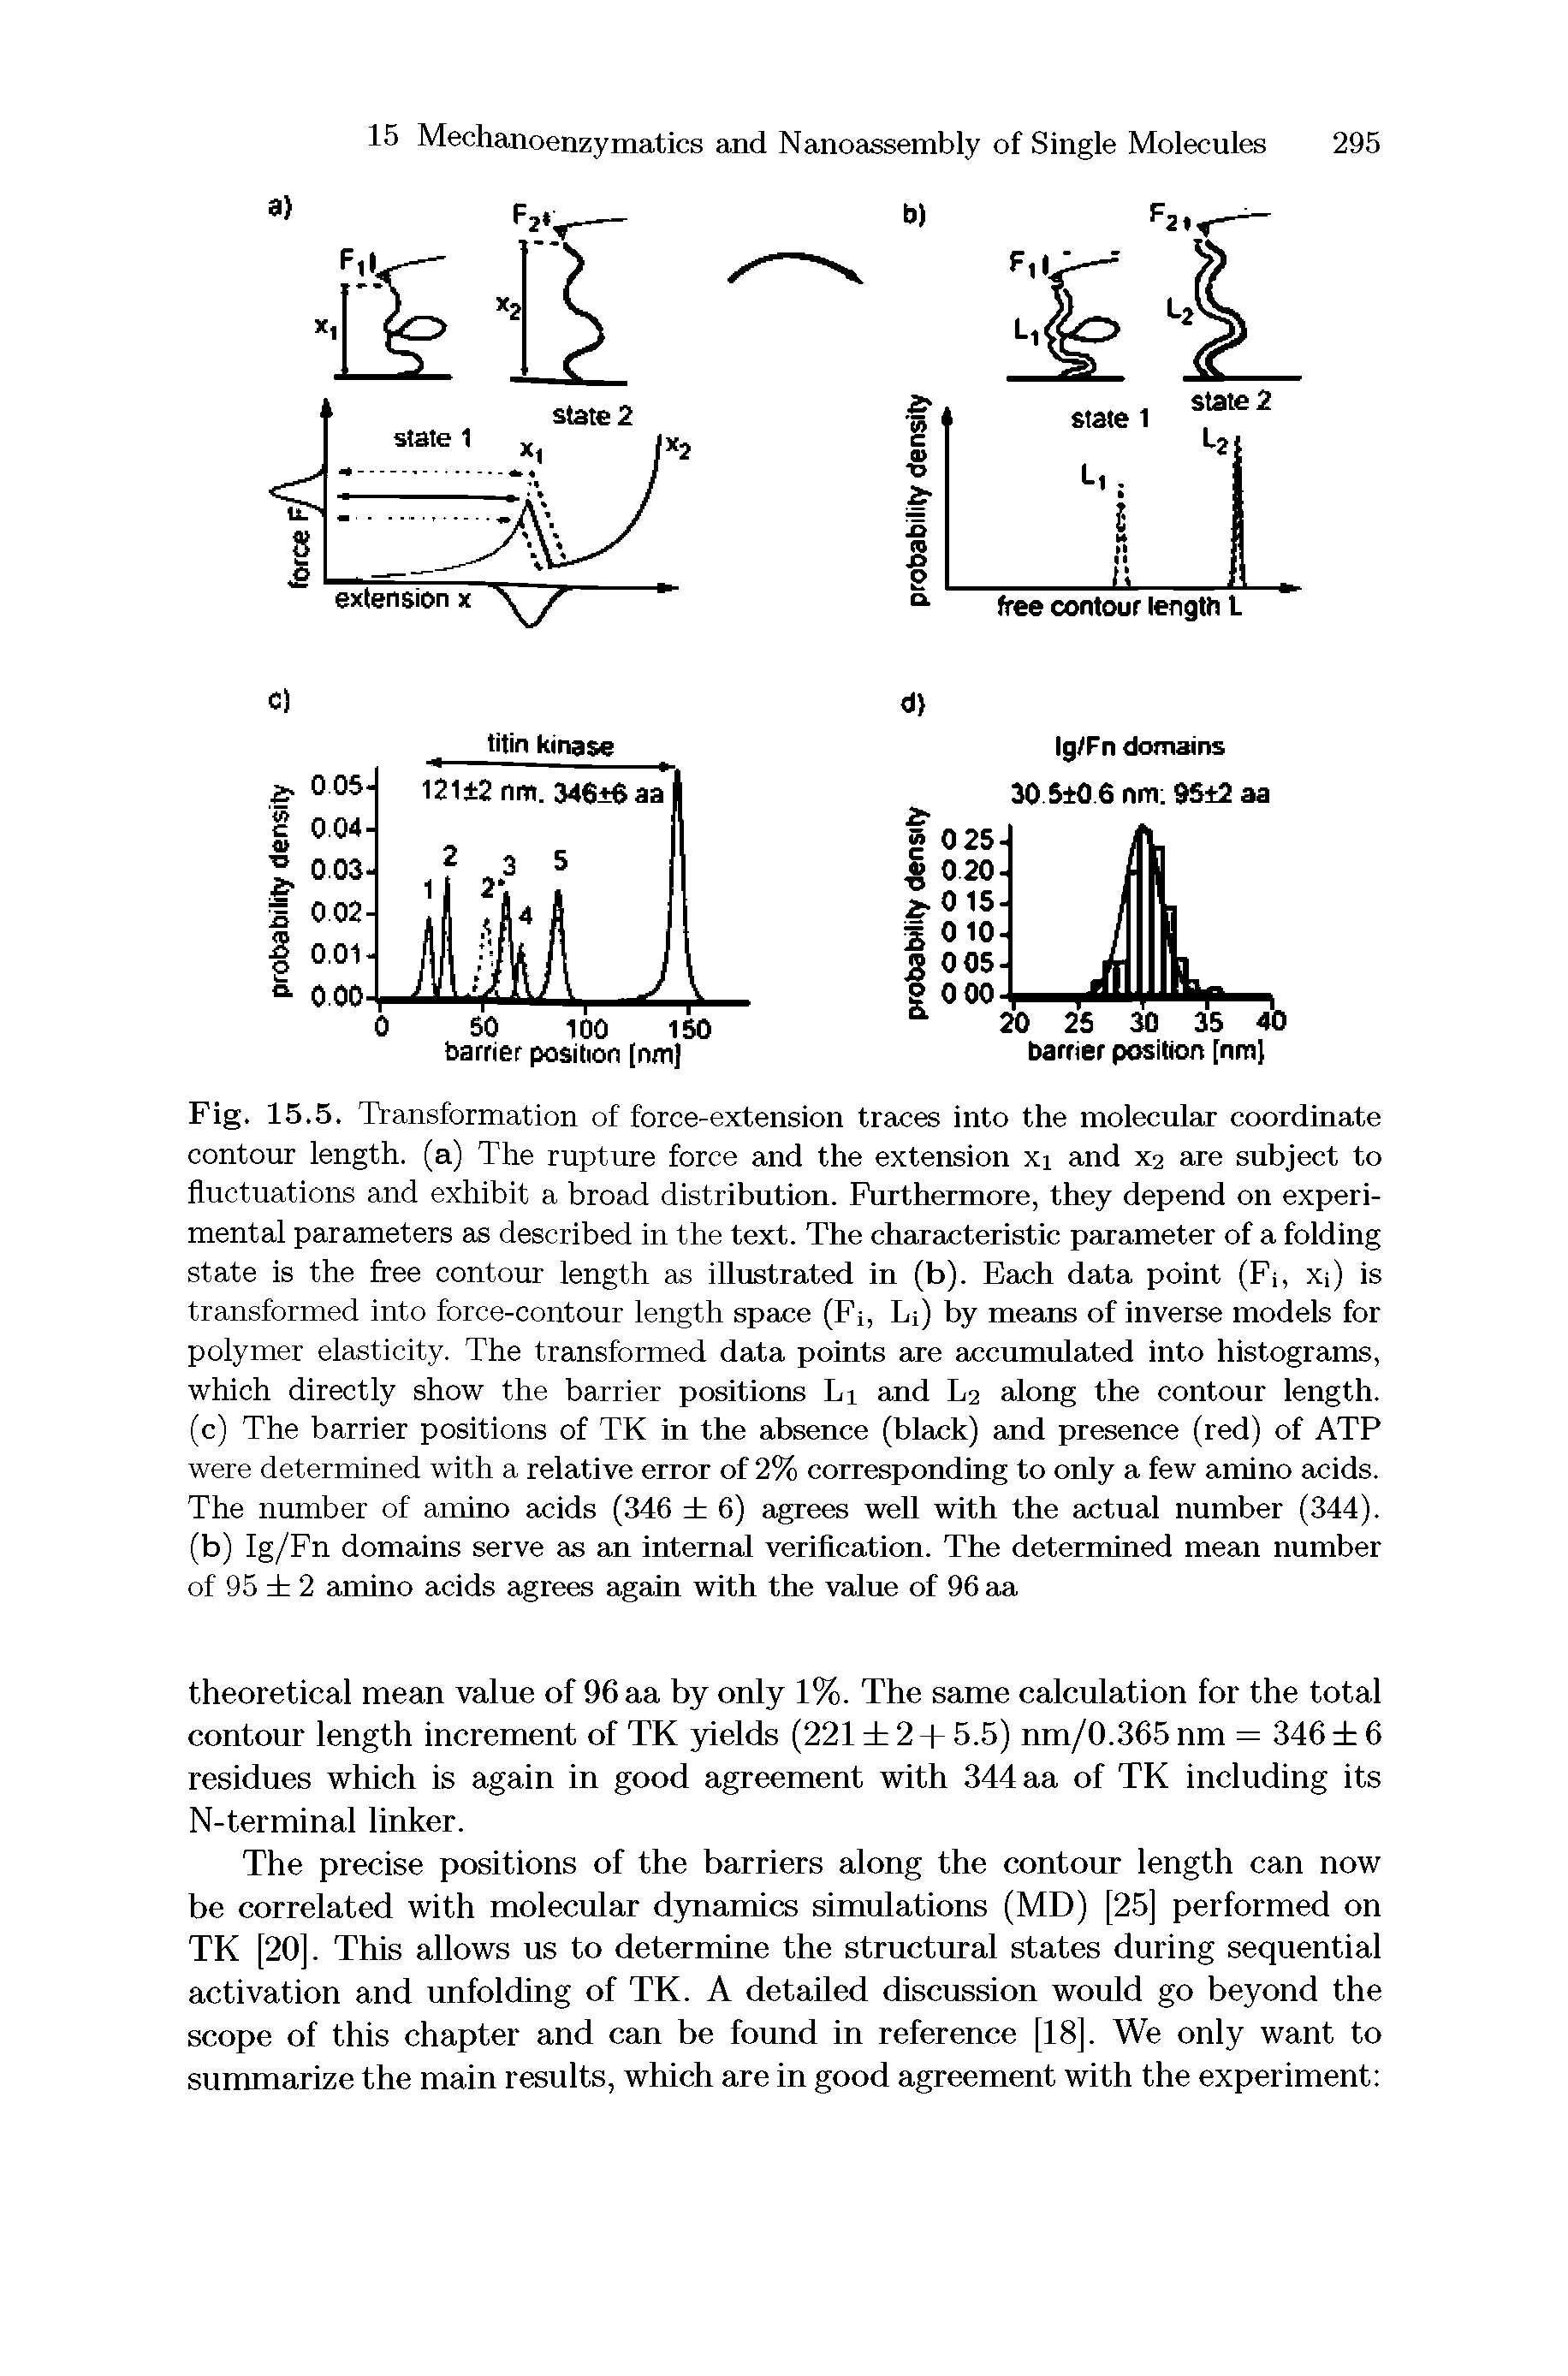 Fig. 15.5. Transformation of force-extension traces into the molecular coordinate contour length, (a) The rupture force and the extension xi and X2 are subject to fluctuations and exhibit a broad distribution. Furthermore, they depend on experimental parameters as described in the text. The characteristic parameter of a folding state is the free contour length as illustrated in (b). Each data point (Fi, Xi) is transformed into force-contour length space (Fi, Li) by means of inverse models for polymer elasticity. The transformed data points are accumulated into histograms, which directly show the barrier positions Li and L2 along the contour length, (c) The barrier positions of TK in the absence (black) and presence (red) of ATP were determined with a relative error of 2% corresponding to only a few amino acids. The number of amino acids (346 6) agrees well with the actual number (344). (b) Ig/Fn domains serve as an internal verification. The determined mean number of 95 2 amino acids agrees again with the value of 96 aa...